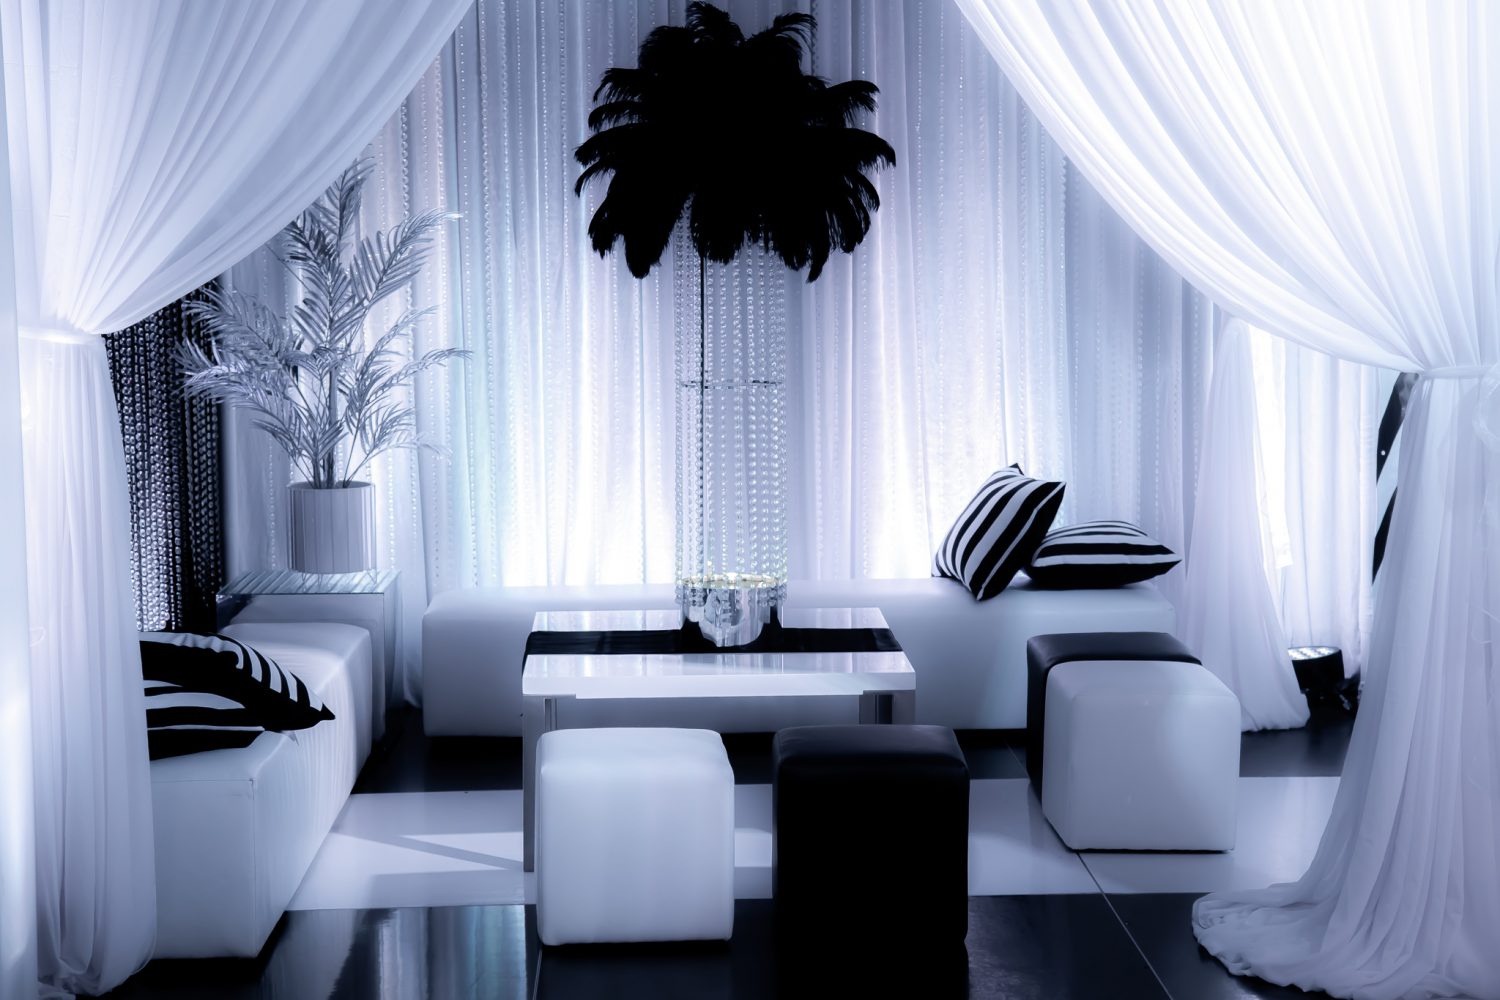 black & white themed event chiffon draping, lounge furniture and feather centrepiece